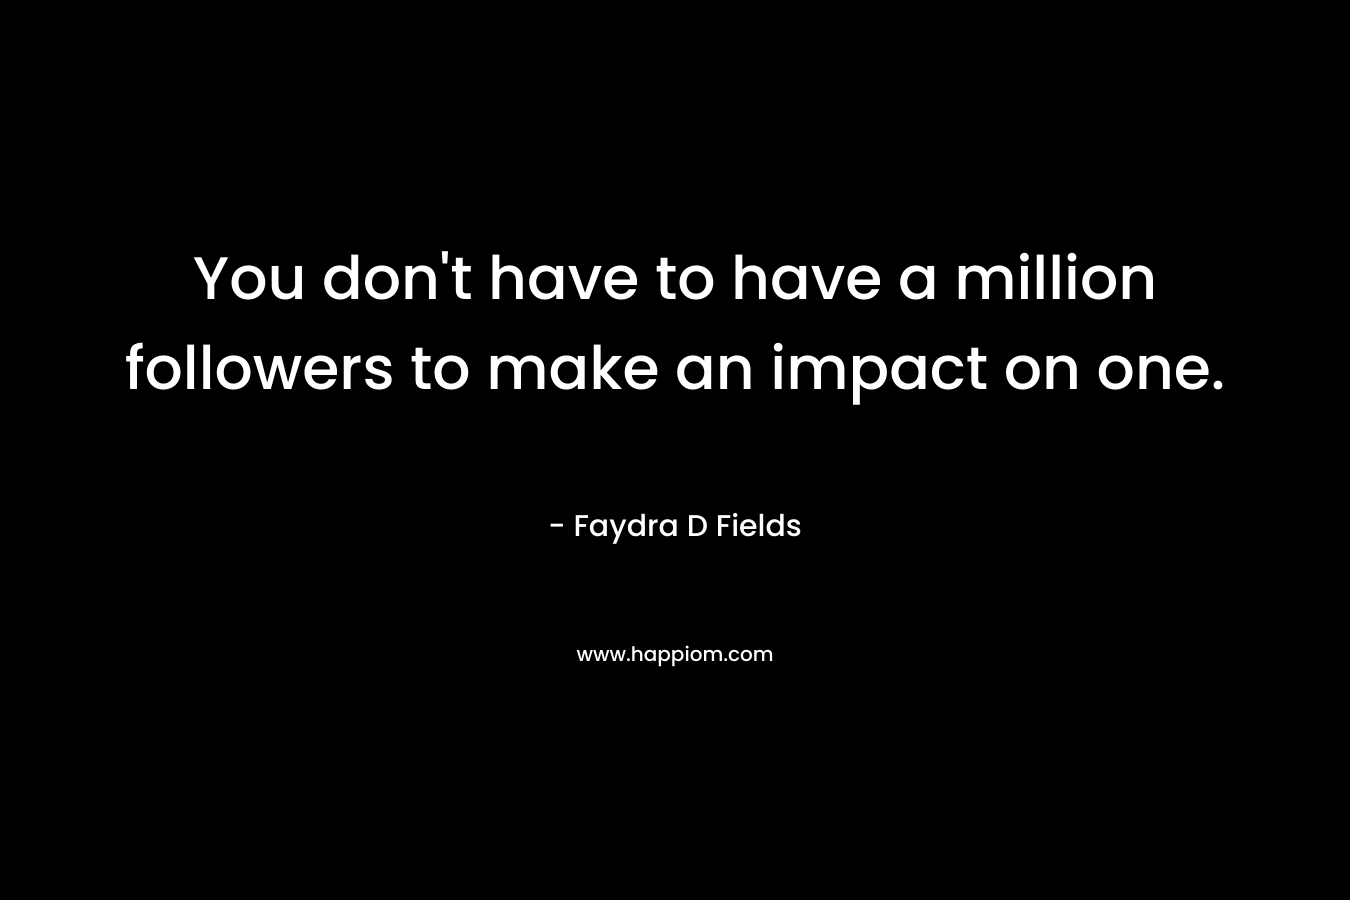 You don't have to have a million followers to make an impact on one.